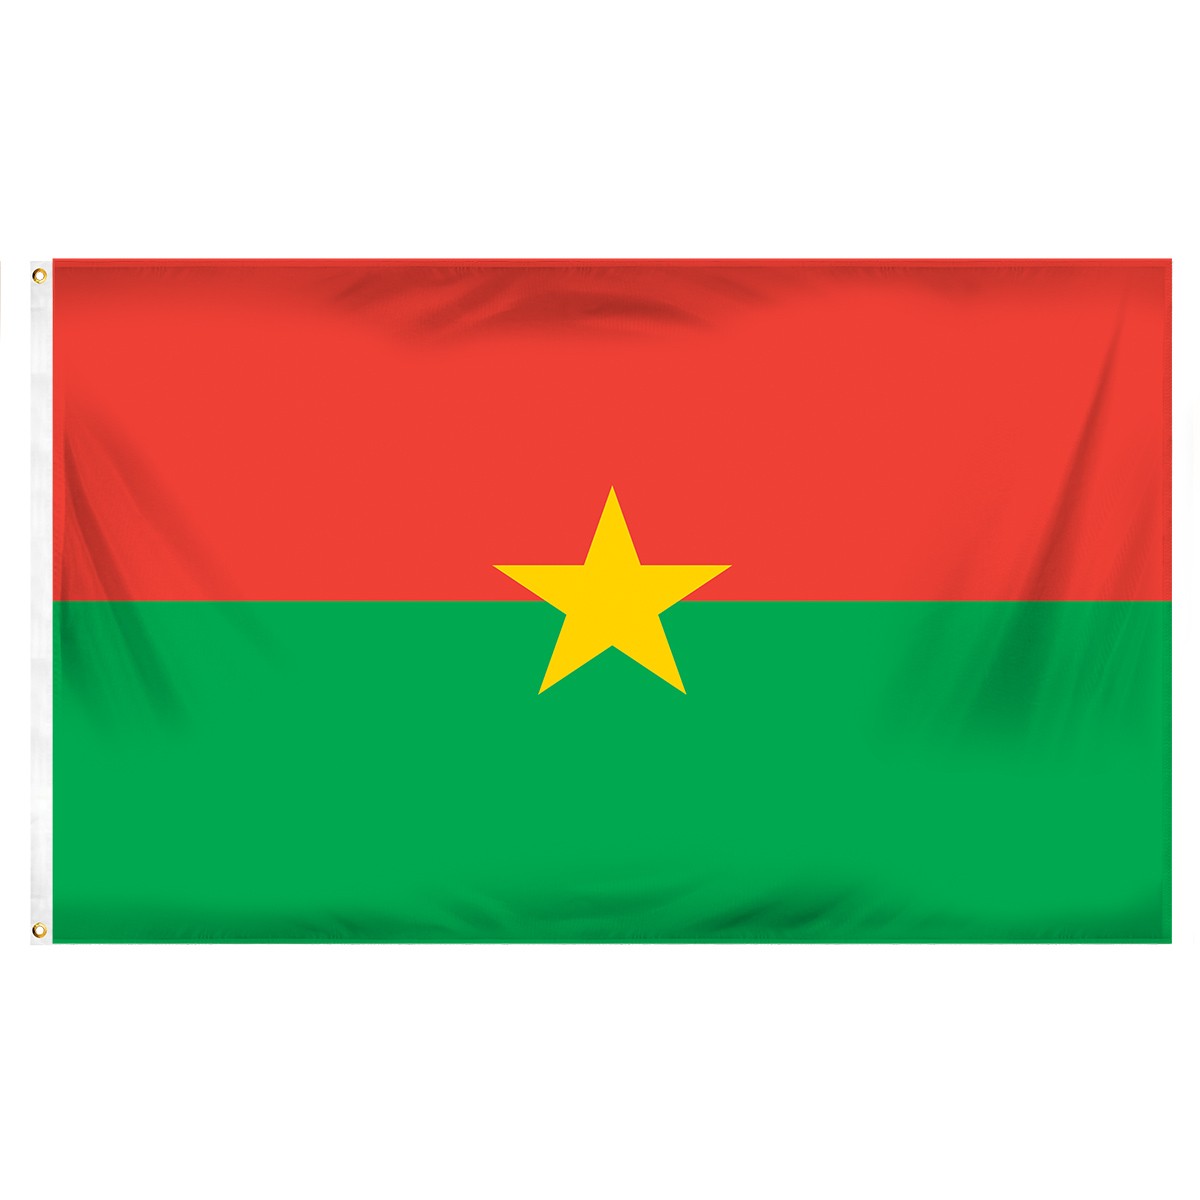 Burkina Faso Posters and Banners